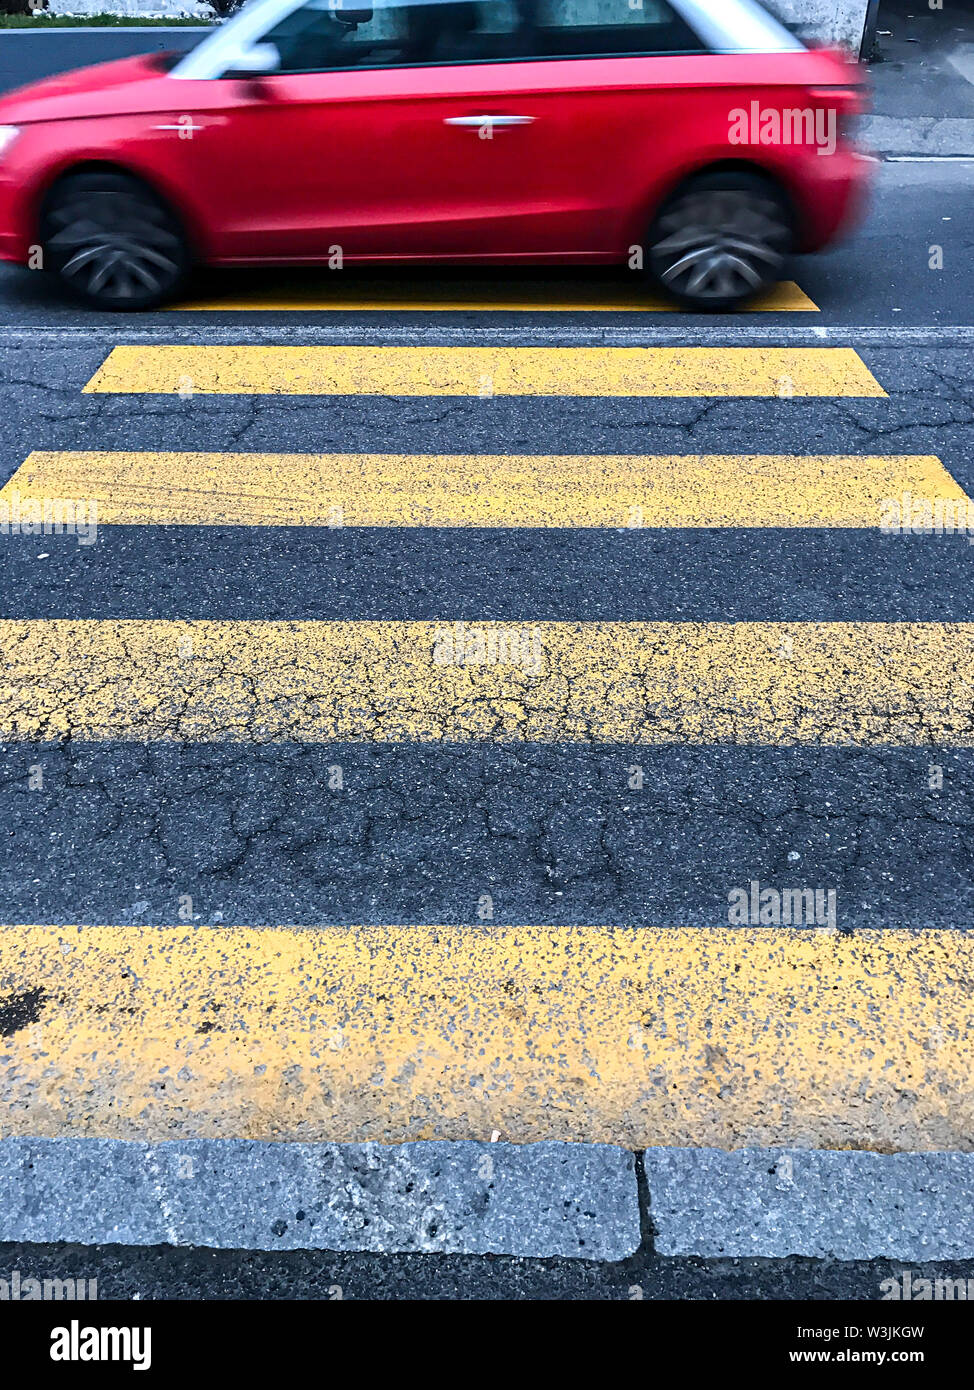 A red car passing over the pedestrian crossing Stock Photo